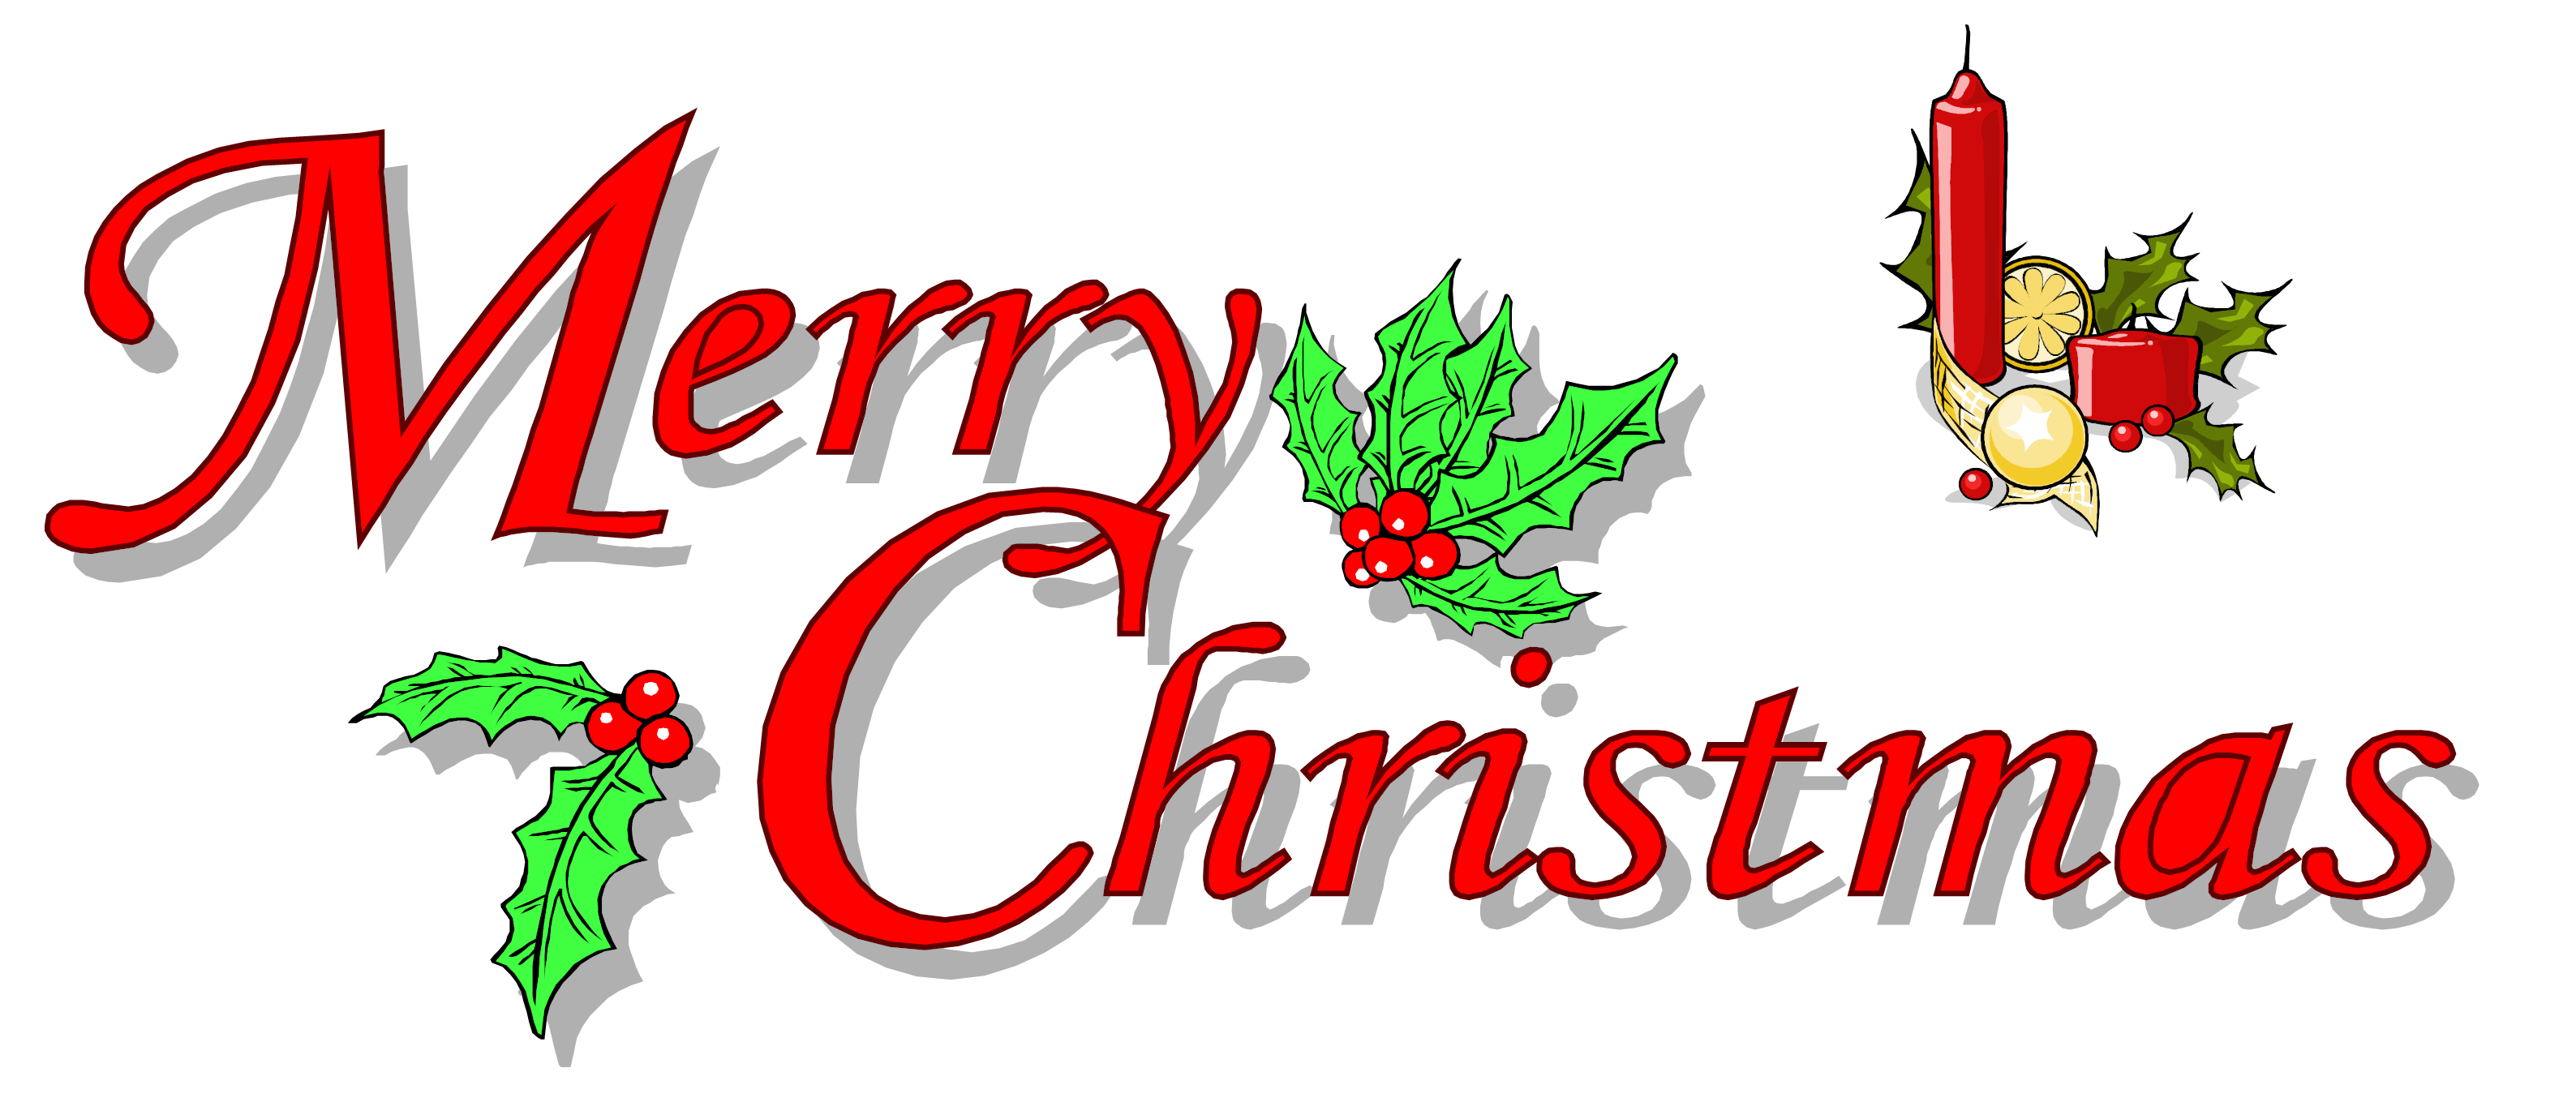 email christmas clipart free - photo #38